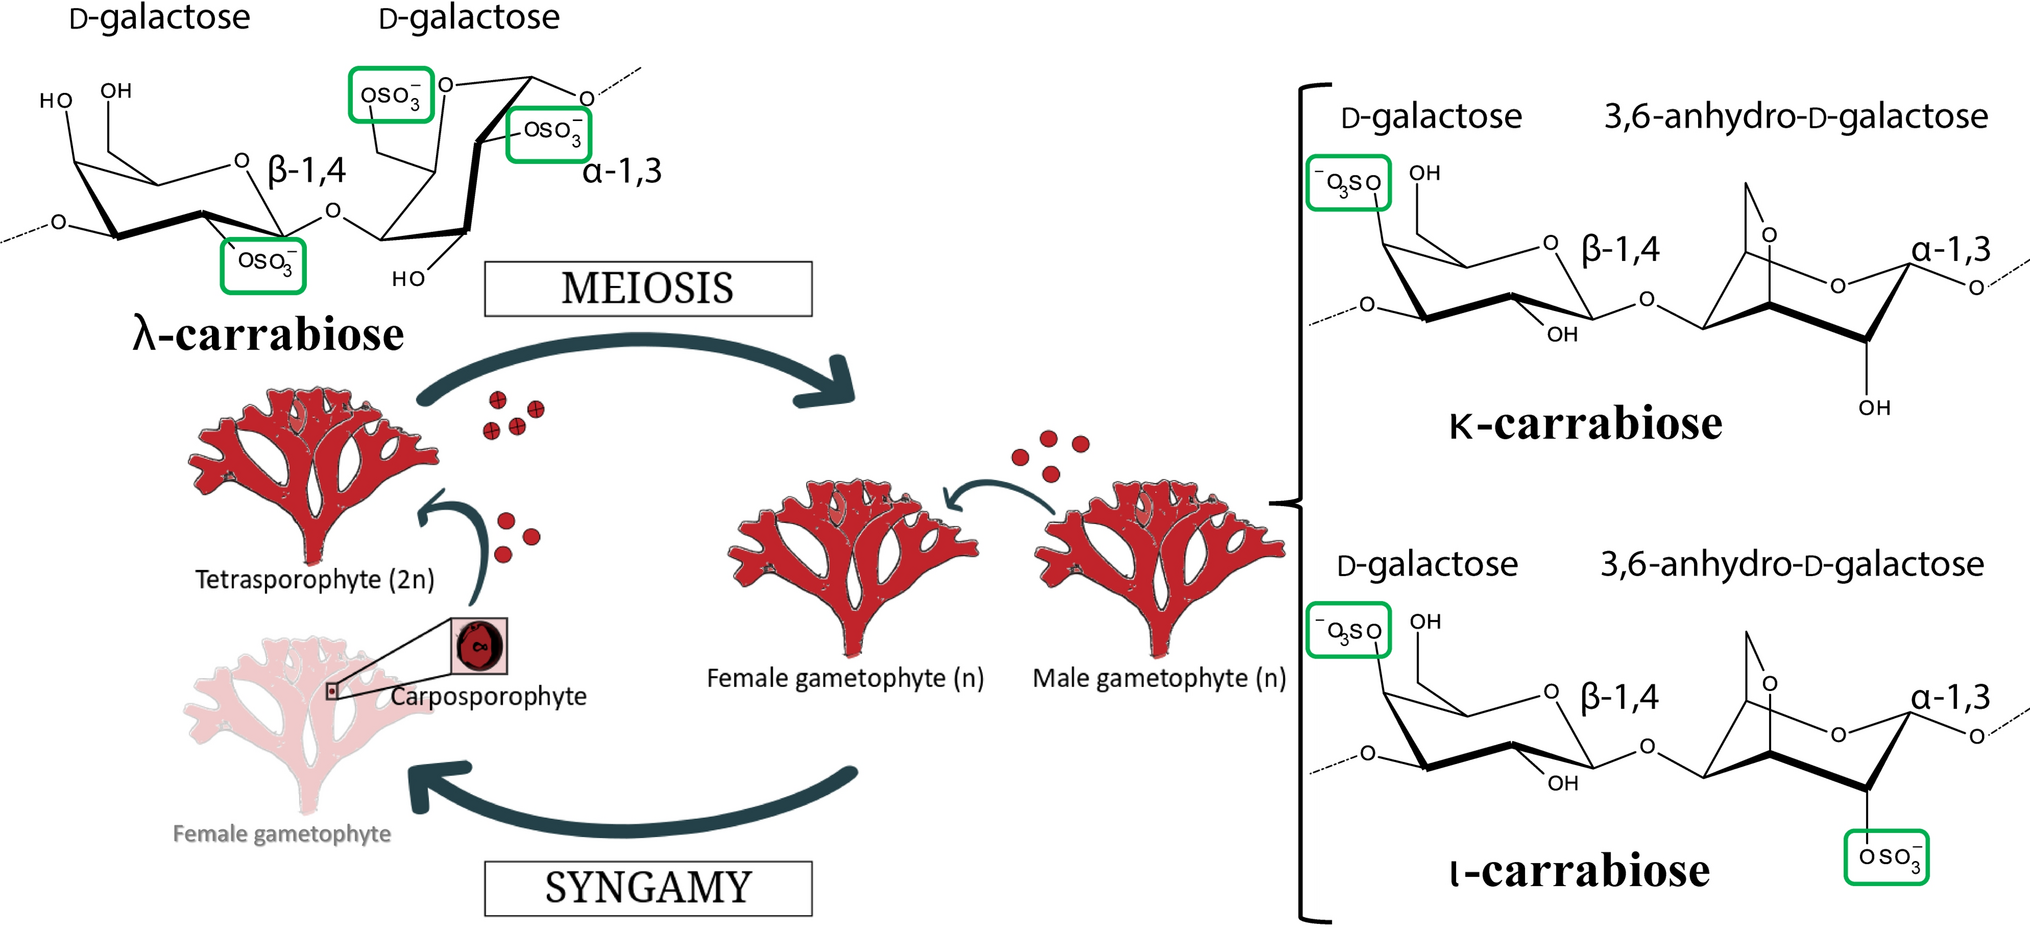 igennem Ikke kompliceret Triumferende To gel or not to gel: differential expression of carrageenan-related genes  between the gametophyte and tetasporophyte life cycle stages of the red  alga Chondrus crispus | Scientific Reports